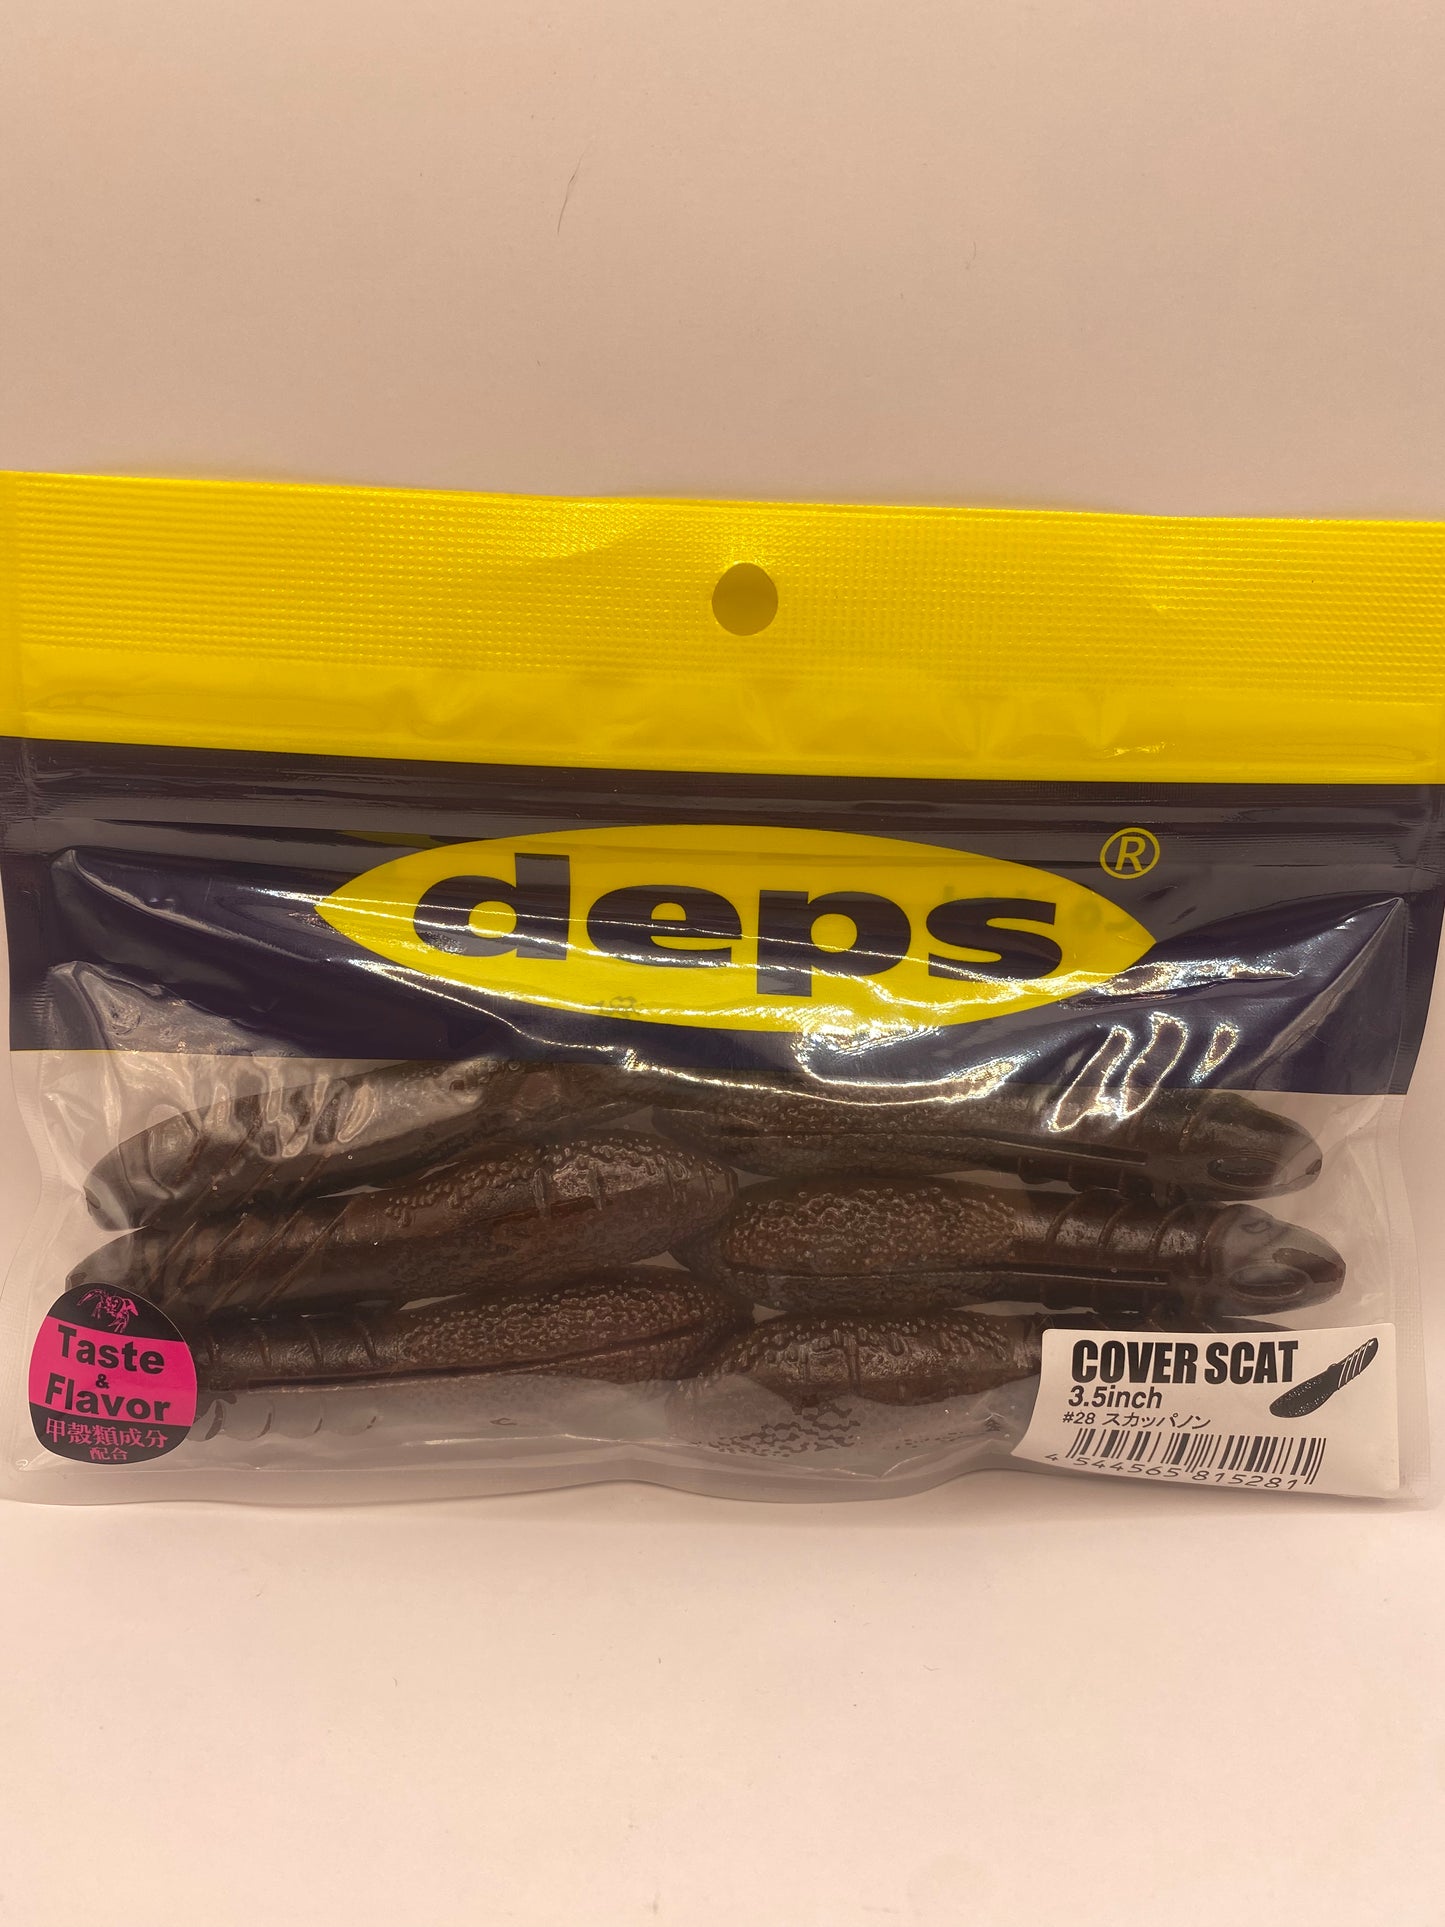 Deps Cover Scat 3.5 inch